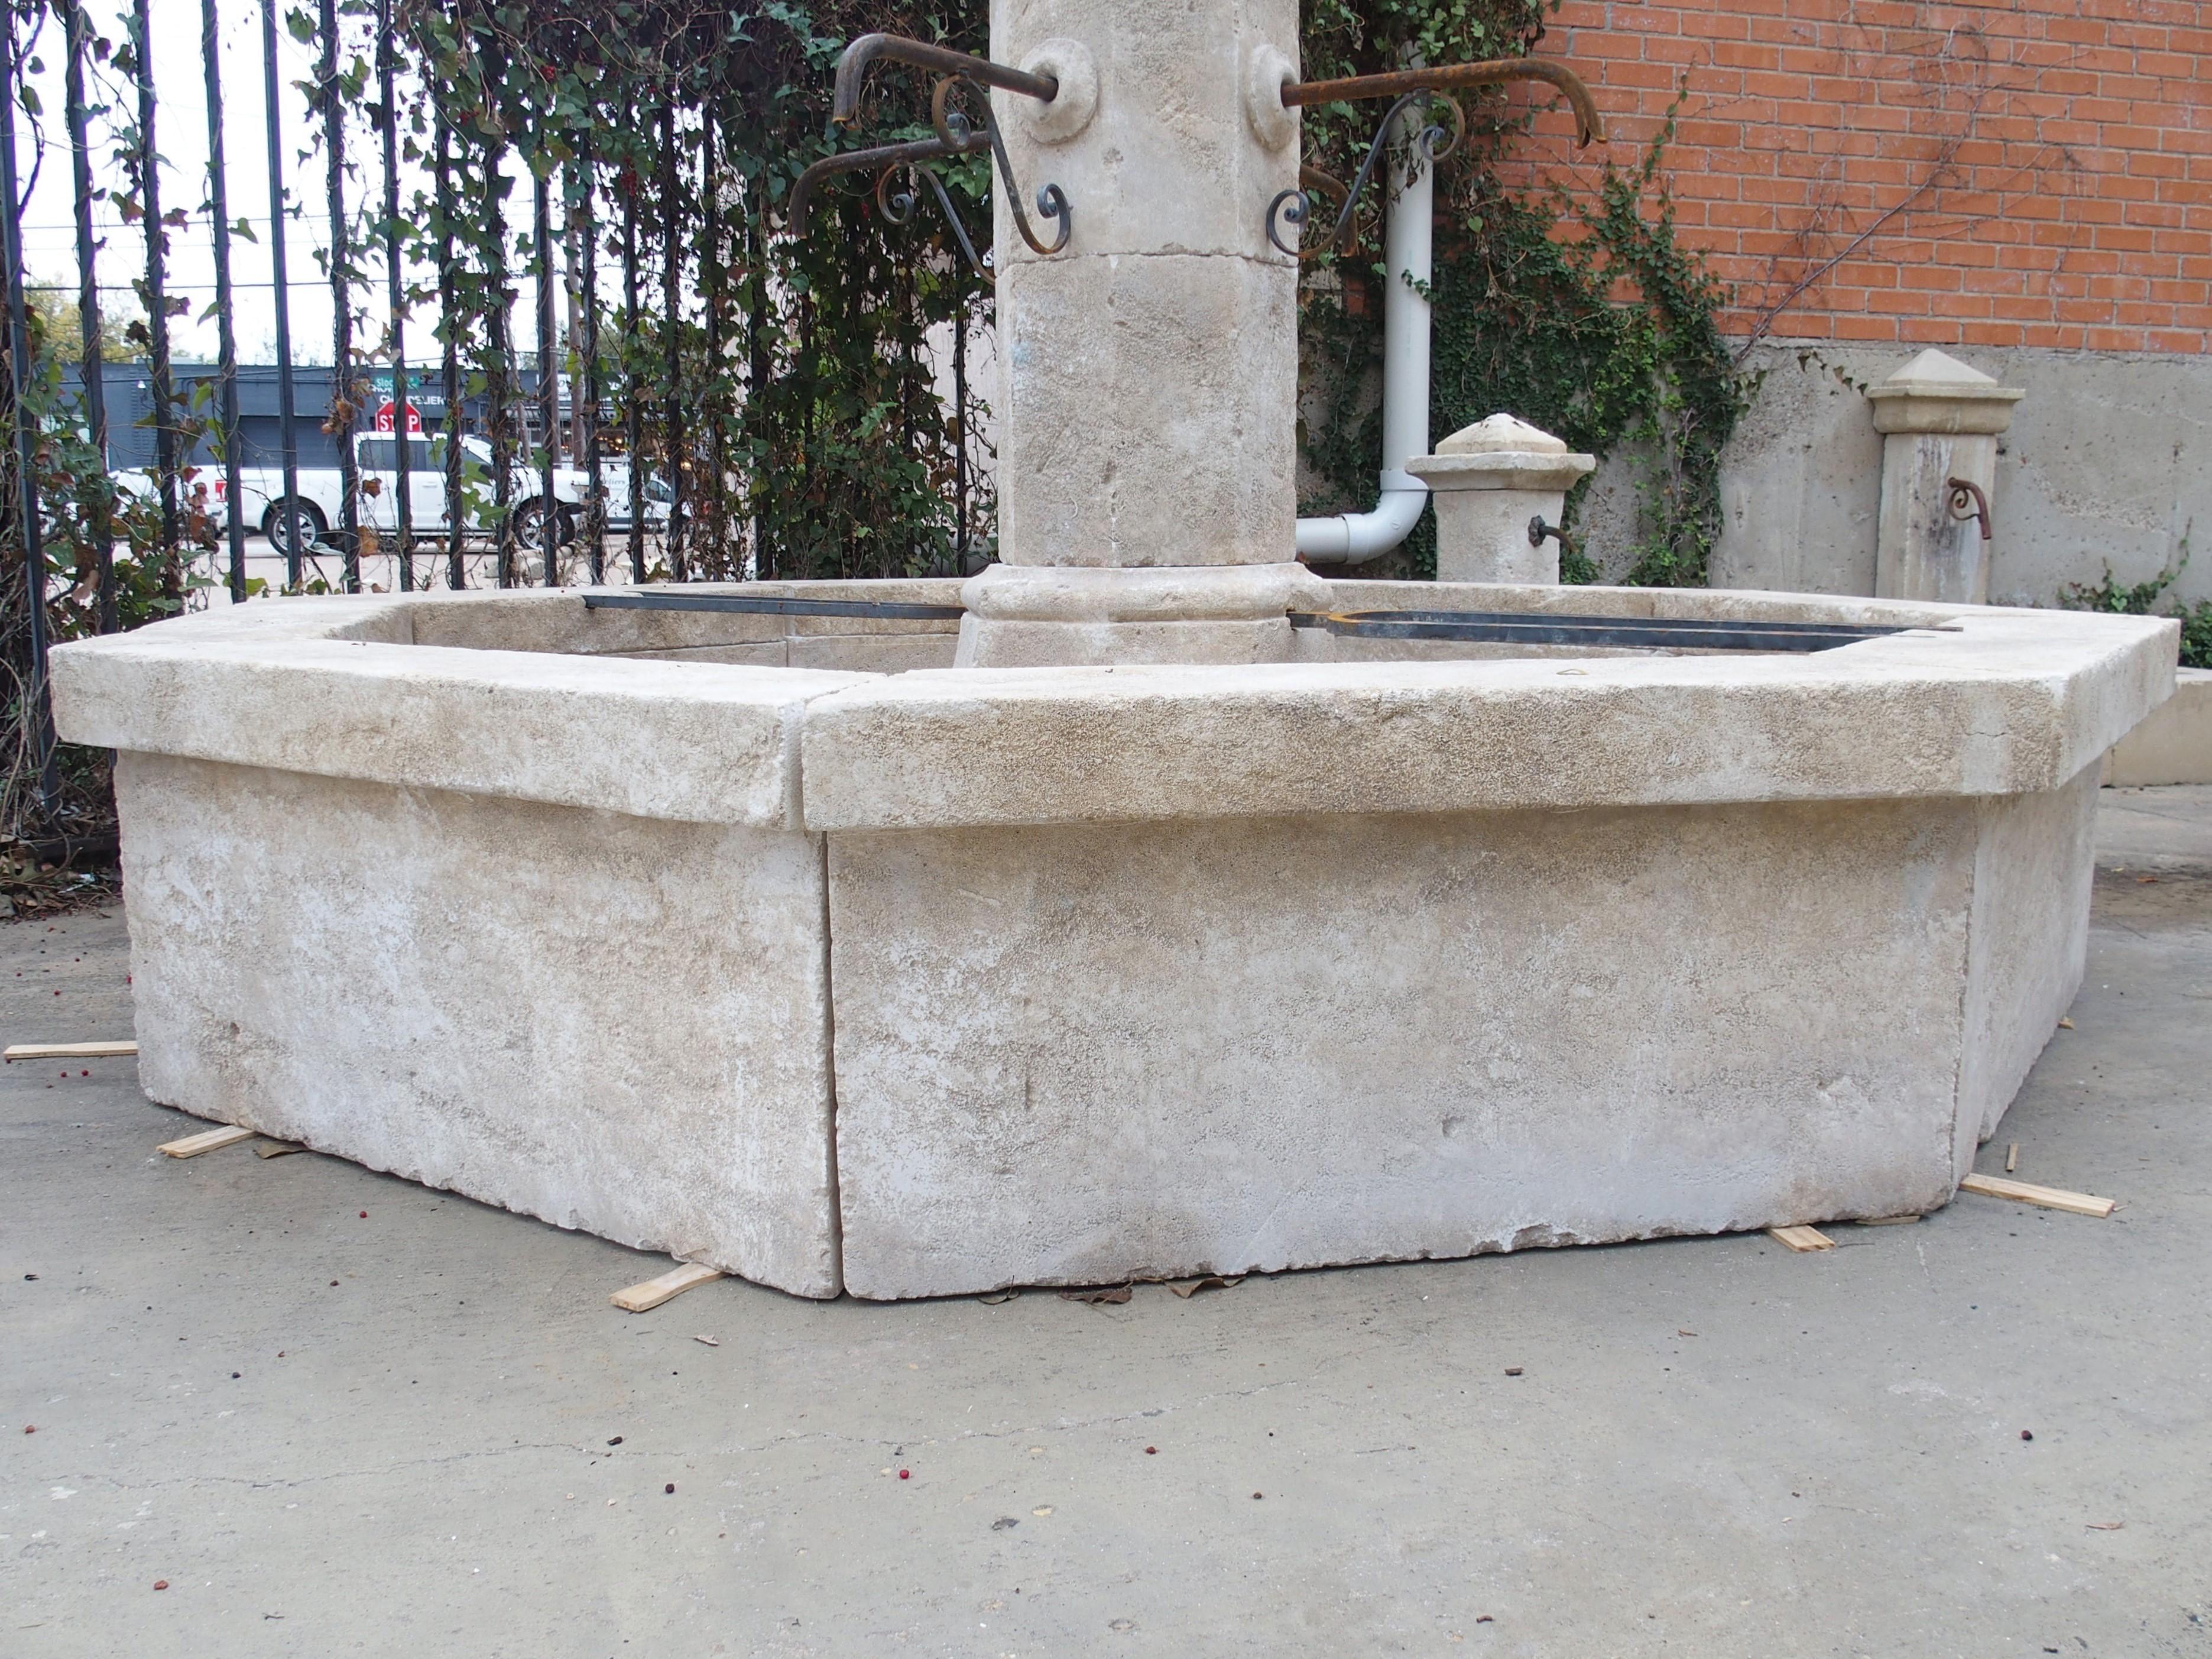 With a diameter of almost 8 ½ feet, this large village center fountain would be an instant centerpiece in a large circular drive or in any landscape design. Hand-carved from 23 pieces of limestone in the South of France, the fountain has an